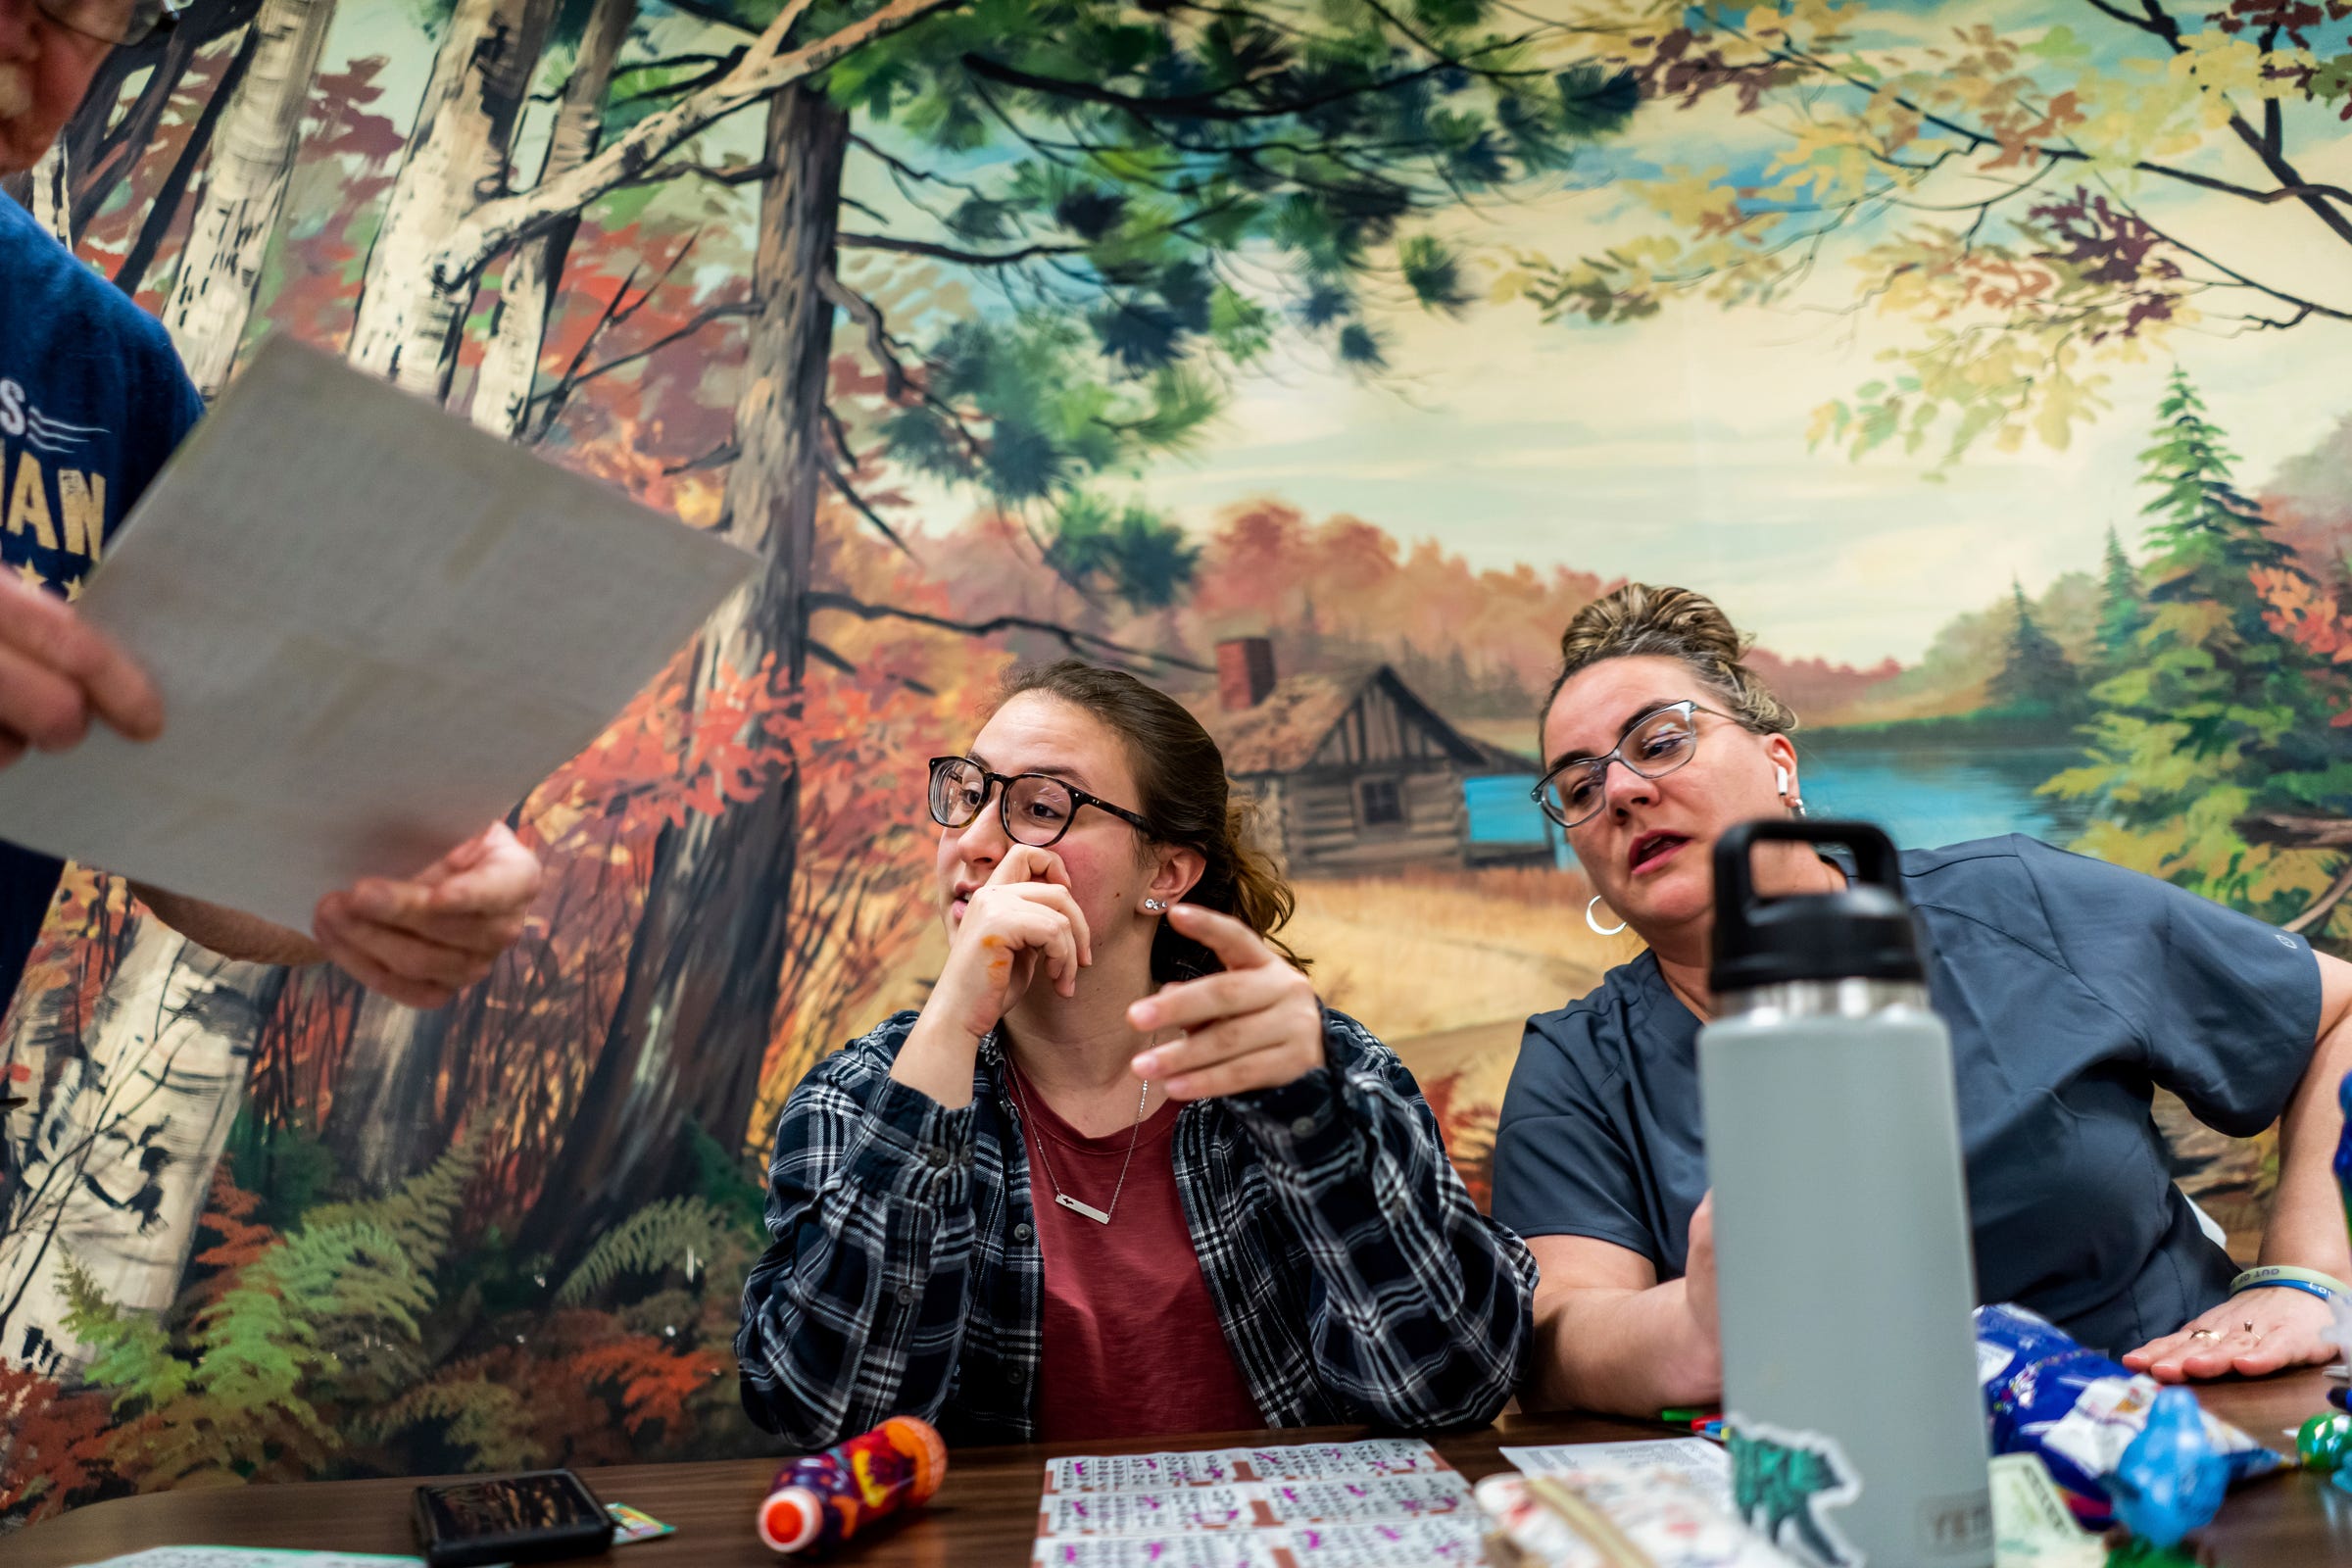 Brooke Letson, 41, right, looks on as her 22-year-old daughter, Taylor Letson, has her card checked for winnings by floor worker Steve Williams during bingo night at the Odd Fellows building in Ishpeming on Friday, Feb. 10, 2023, in Michigan's Upper Peninsula. “I like bingo because it costs me $30 to do this and you’re here for how many hours? Where if you’re gambling at the casino, $30 is gone in five minutes." Brooke Letson said. "This spreads that $30 out.”